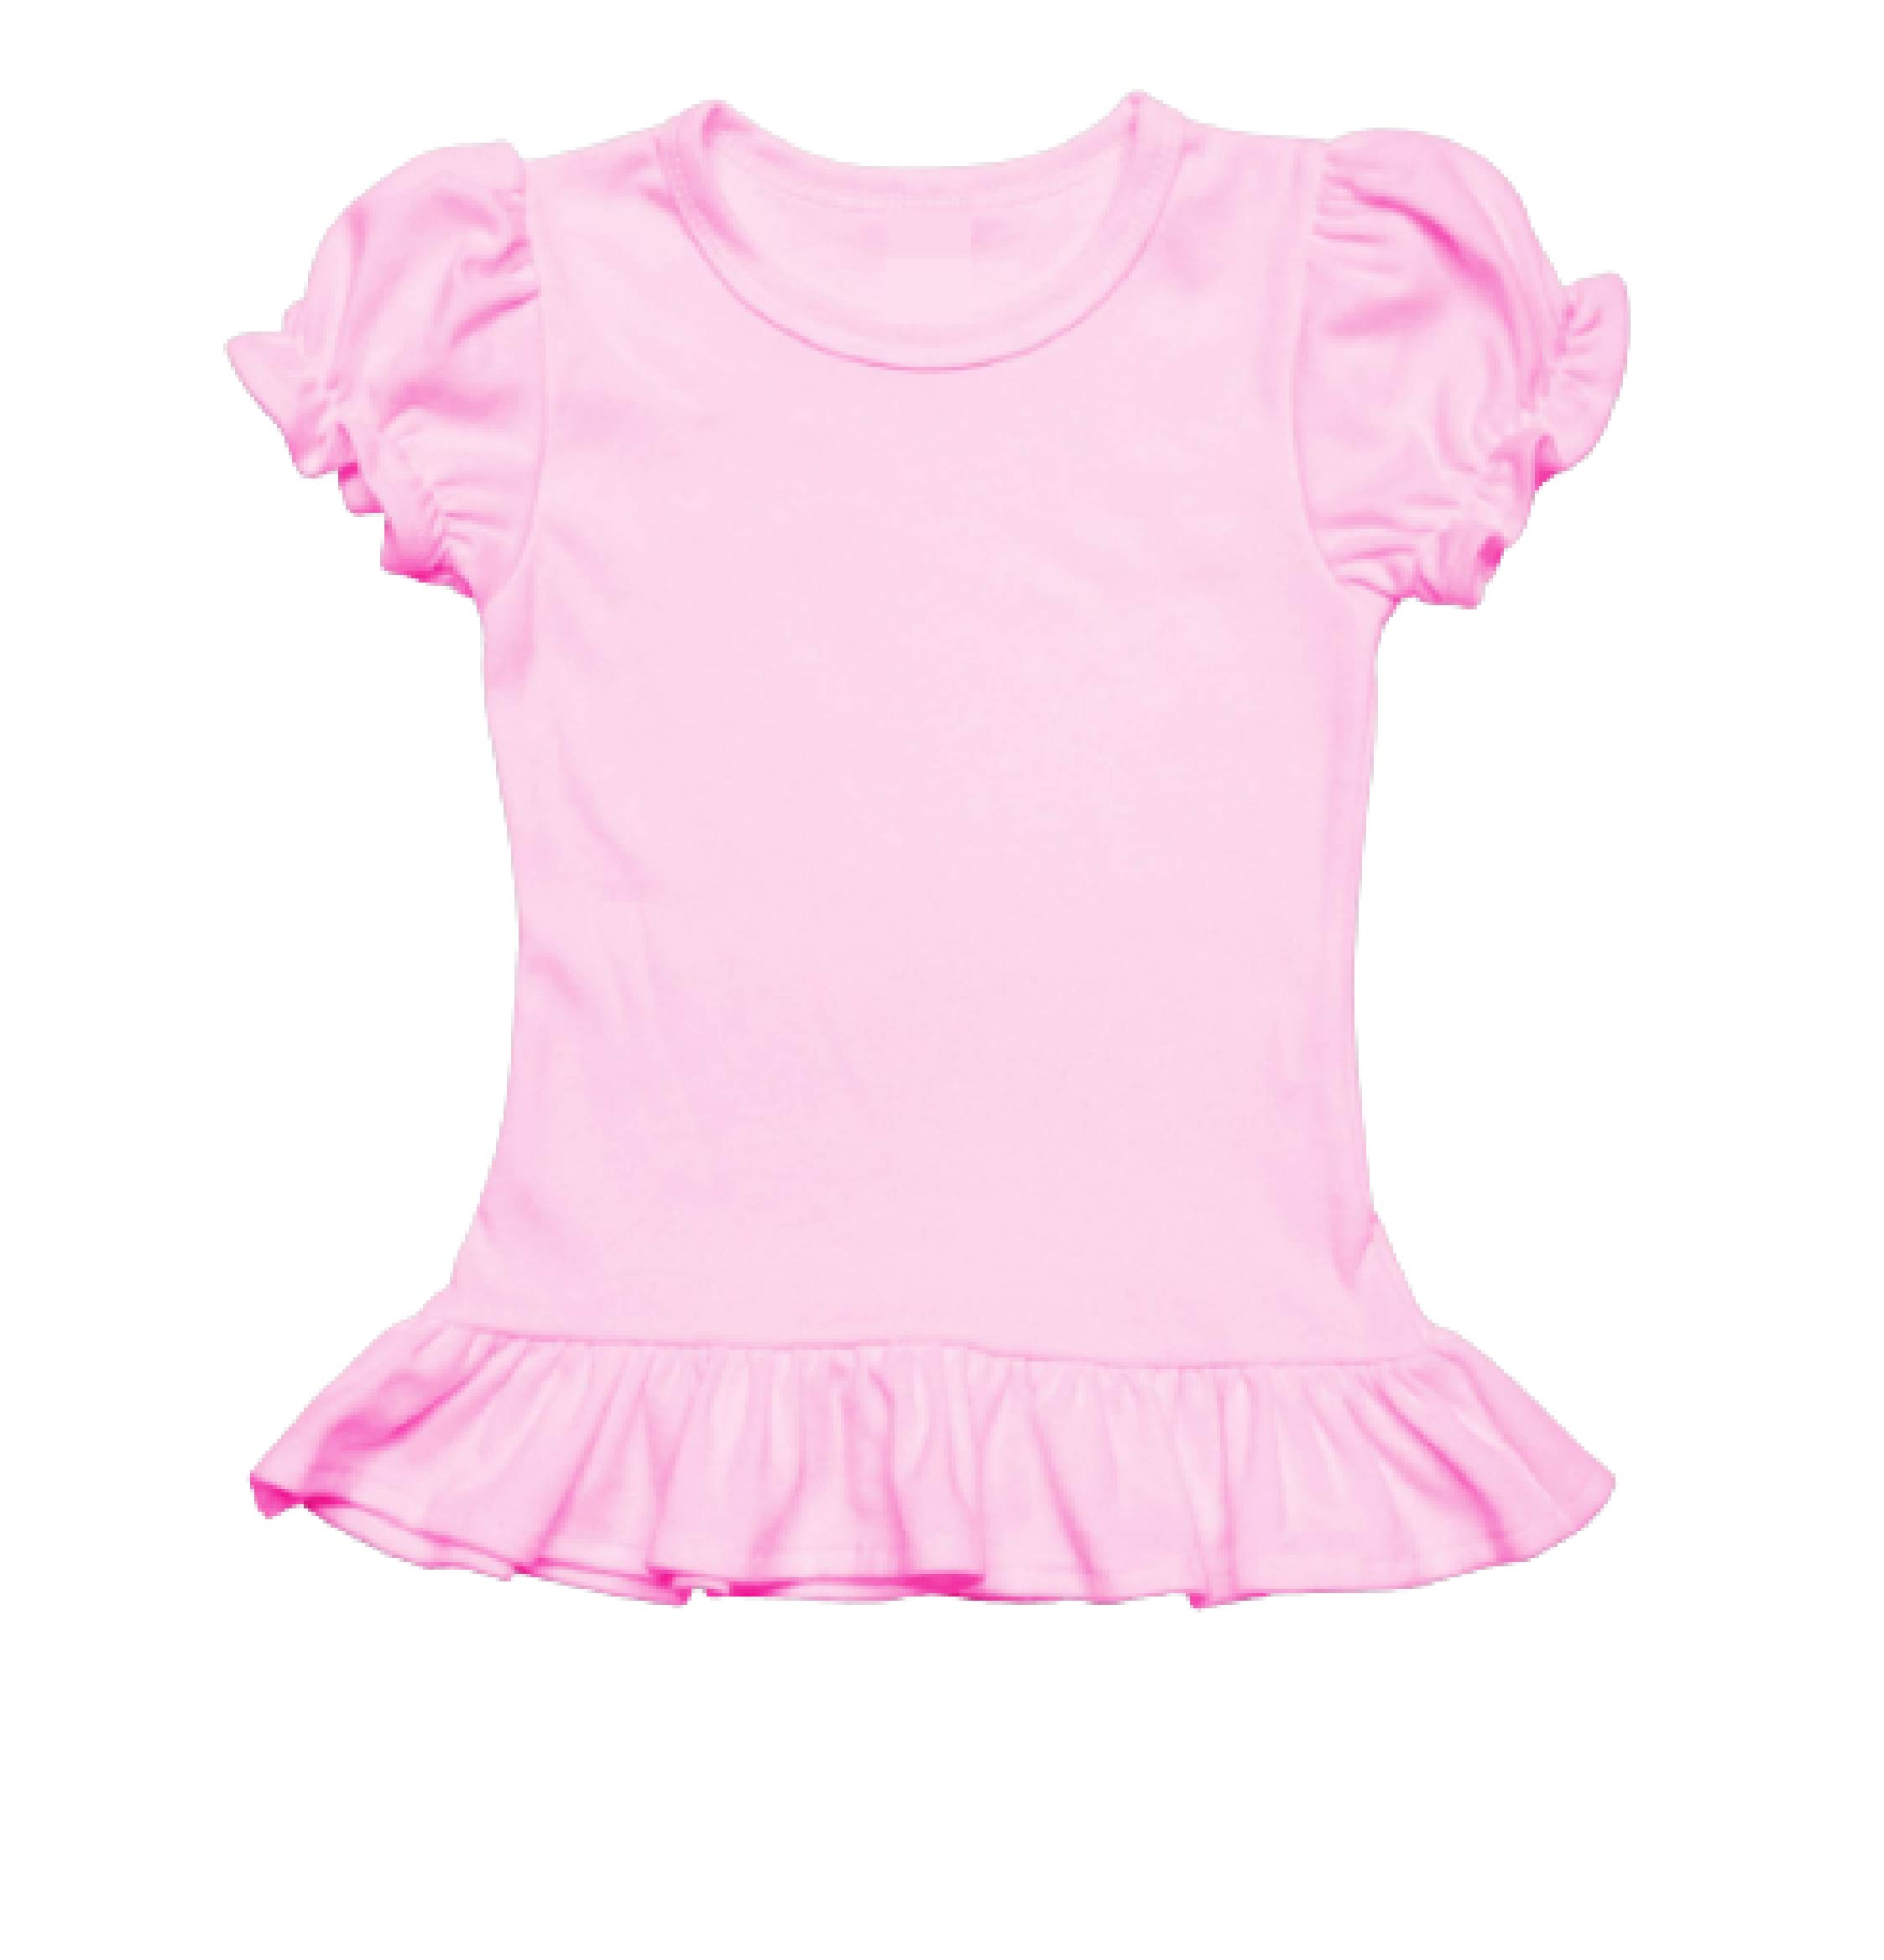 Toddler Sublimation Sleeve Ruffle Top, 65% Polyester / 35% Cotton, Pink